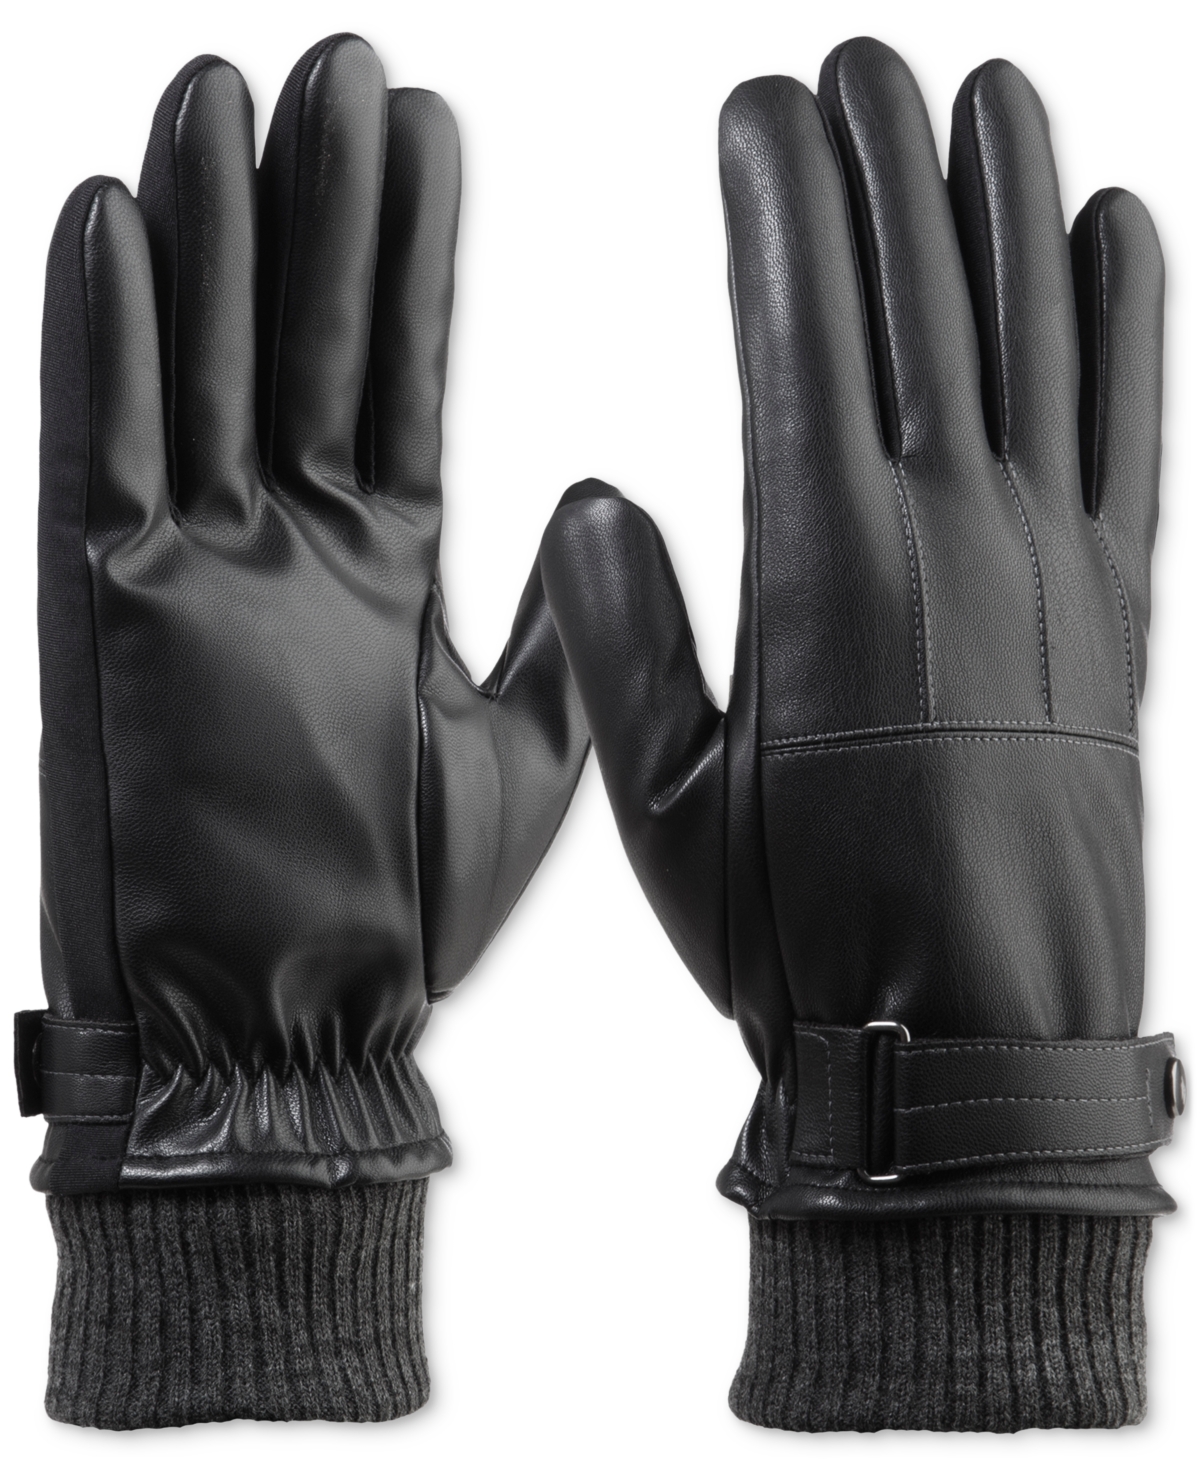 Isotoner Signature Men's Touchscreen Insulated Gloves With Knit Cuffs In Black